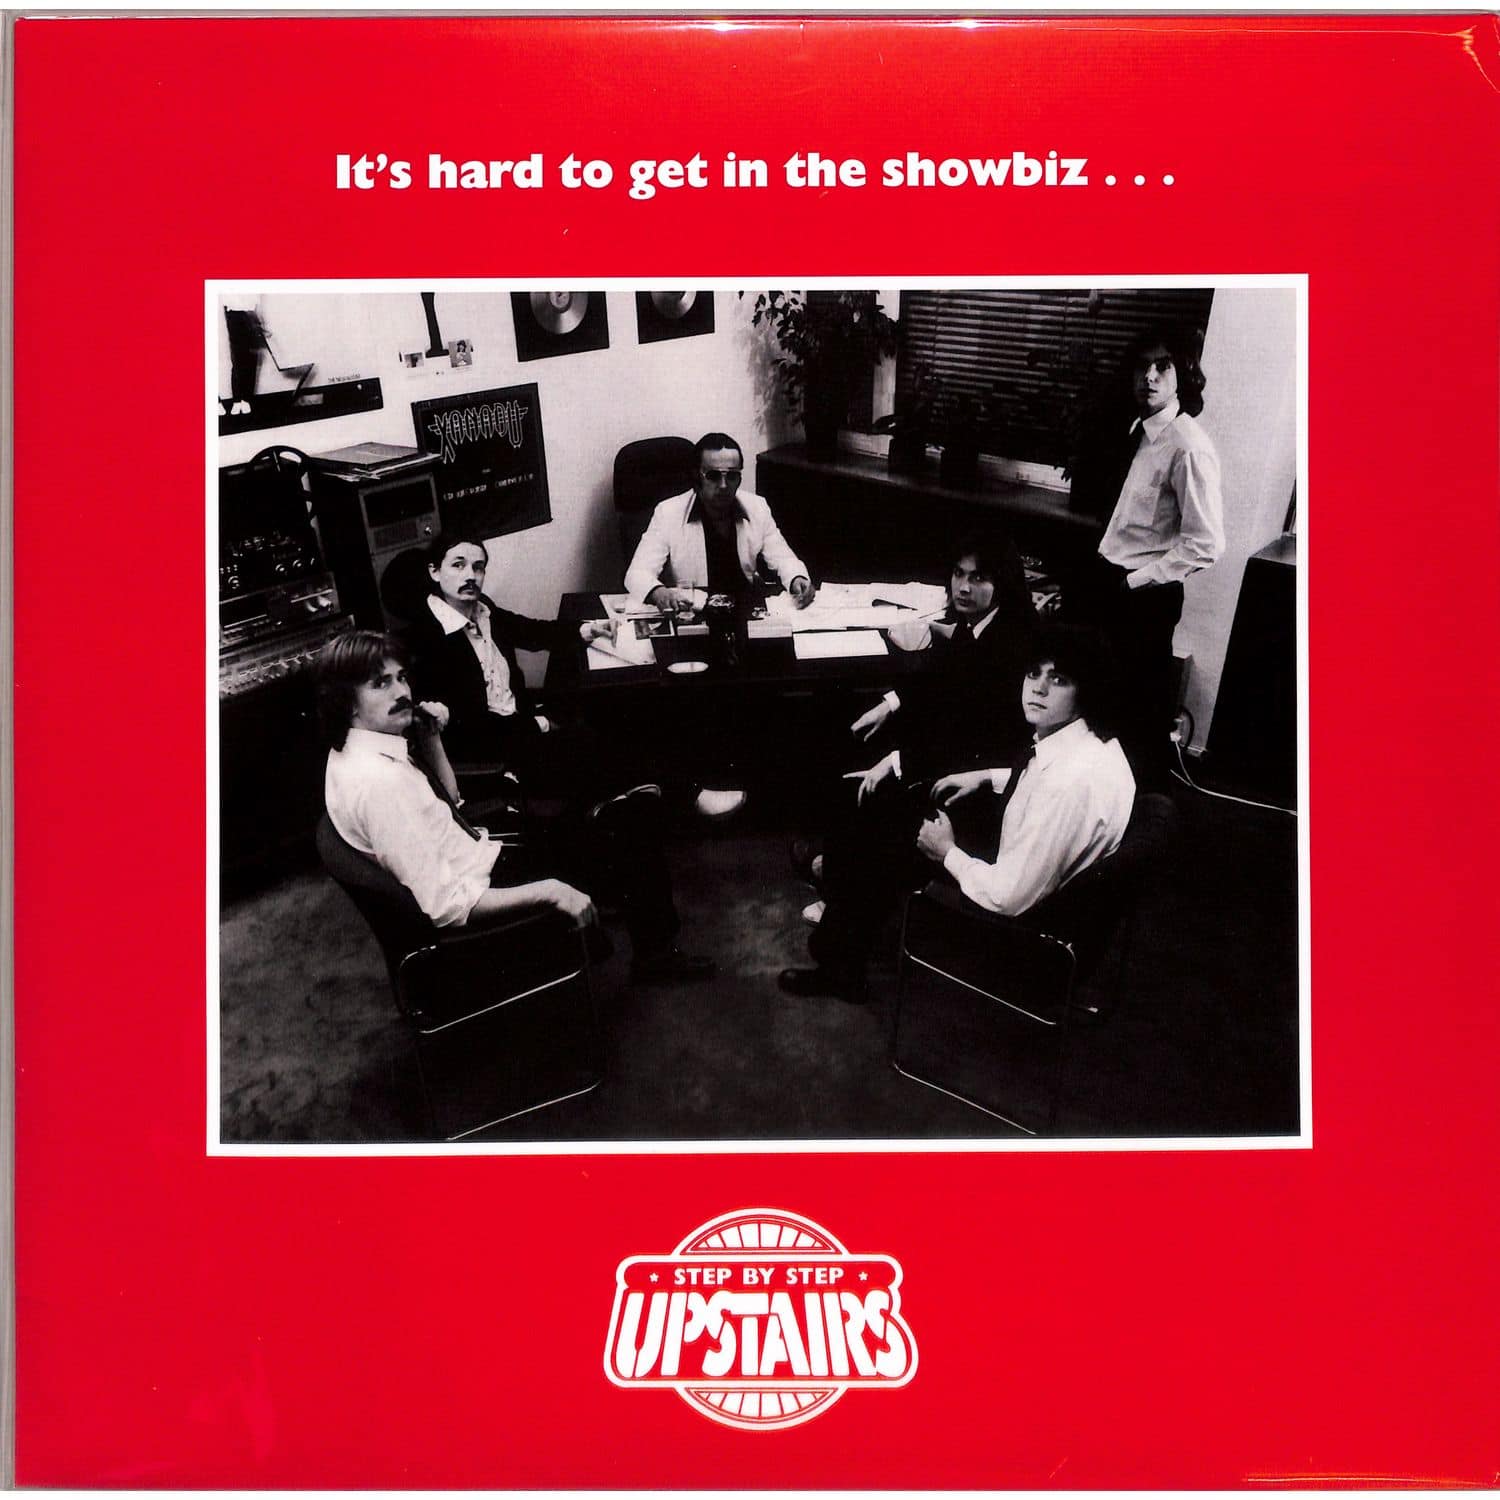 Upstairs - ITS HARD TO GET IN THE SHOWBIZ 